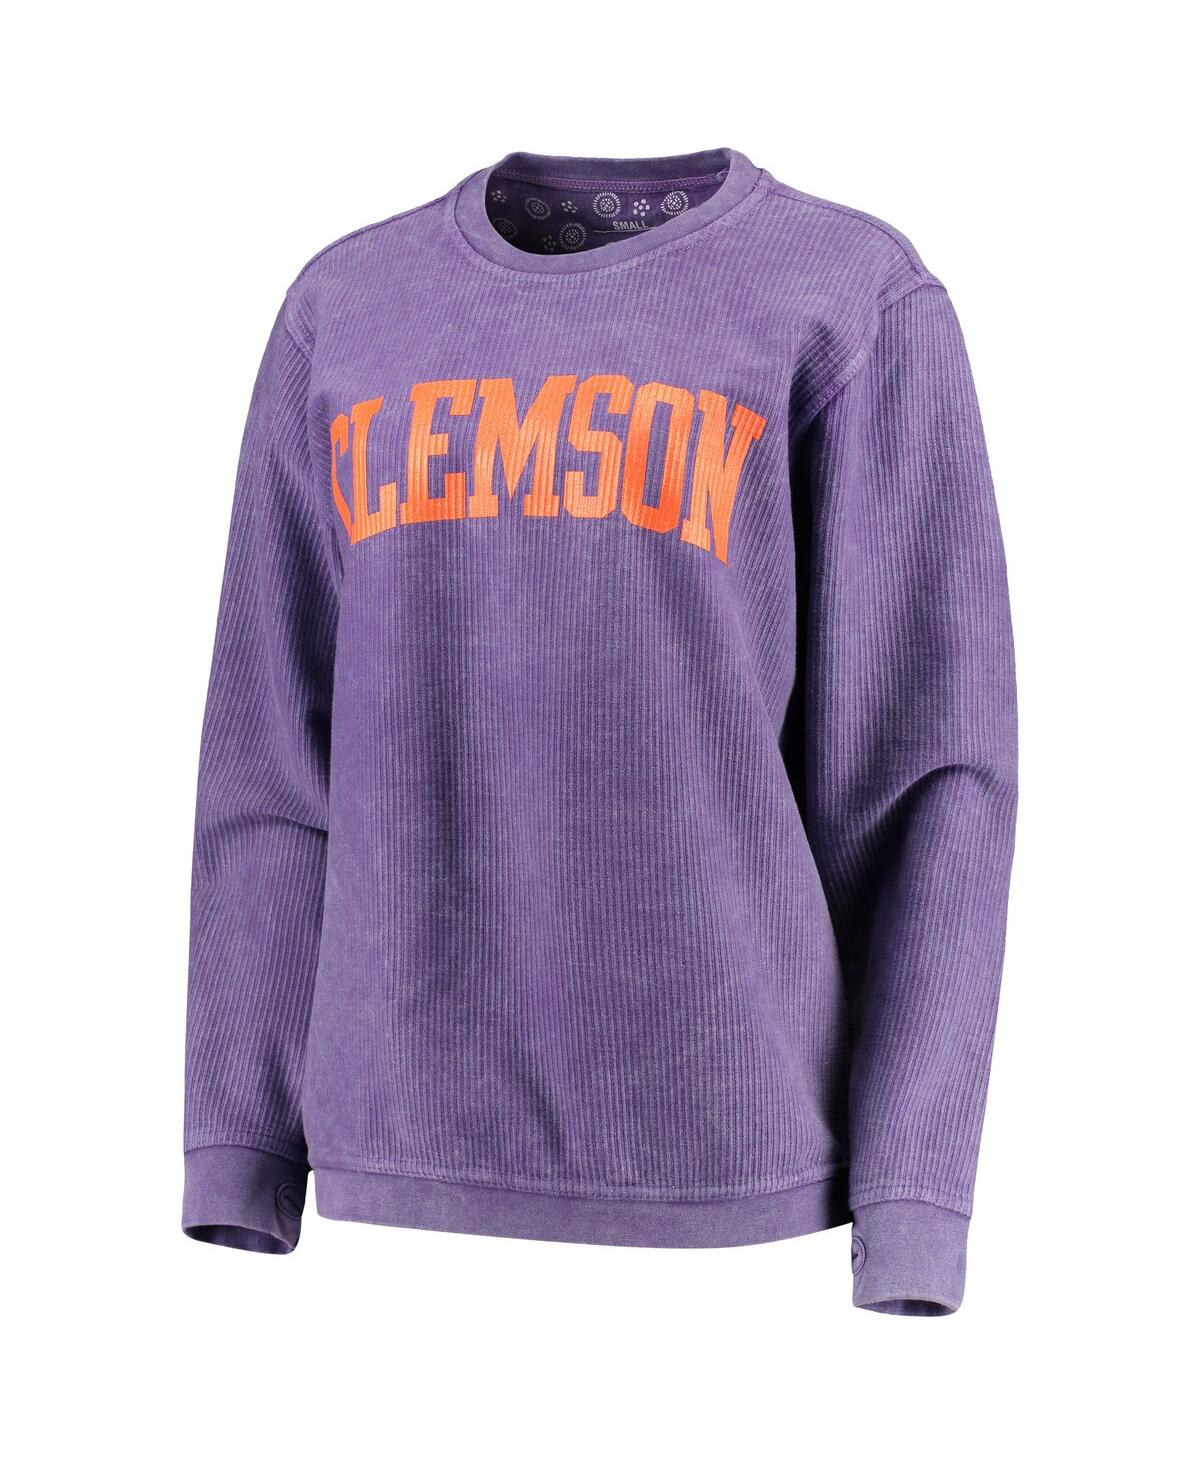 Shop Pressbox Women's  Purple Distressed Clemson Tigers Comfy Cord Vintage-like Wash Basic Arch Pullover S